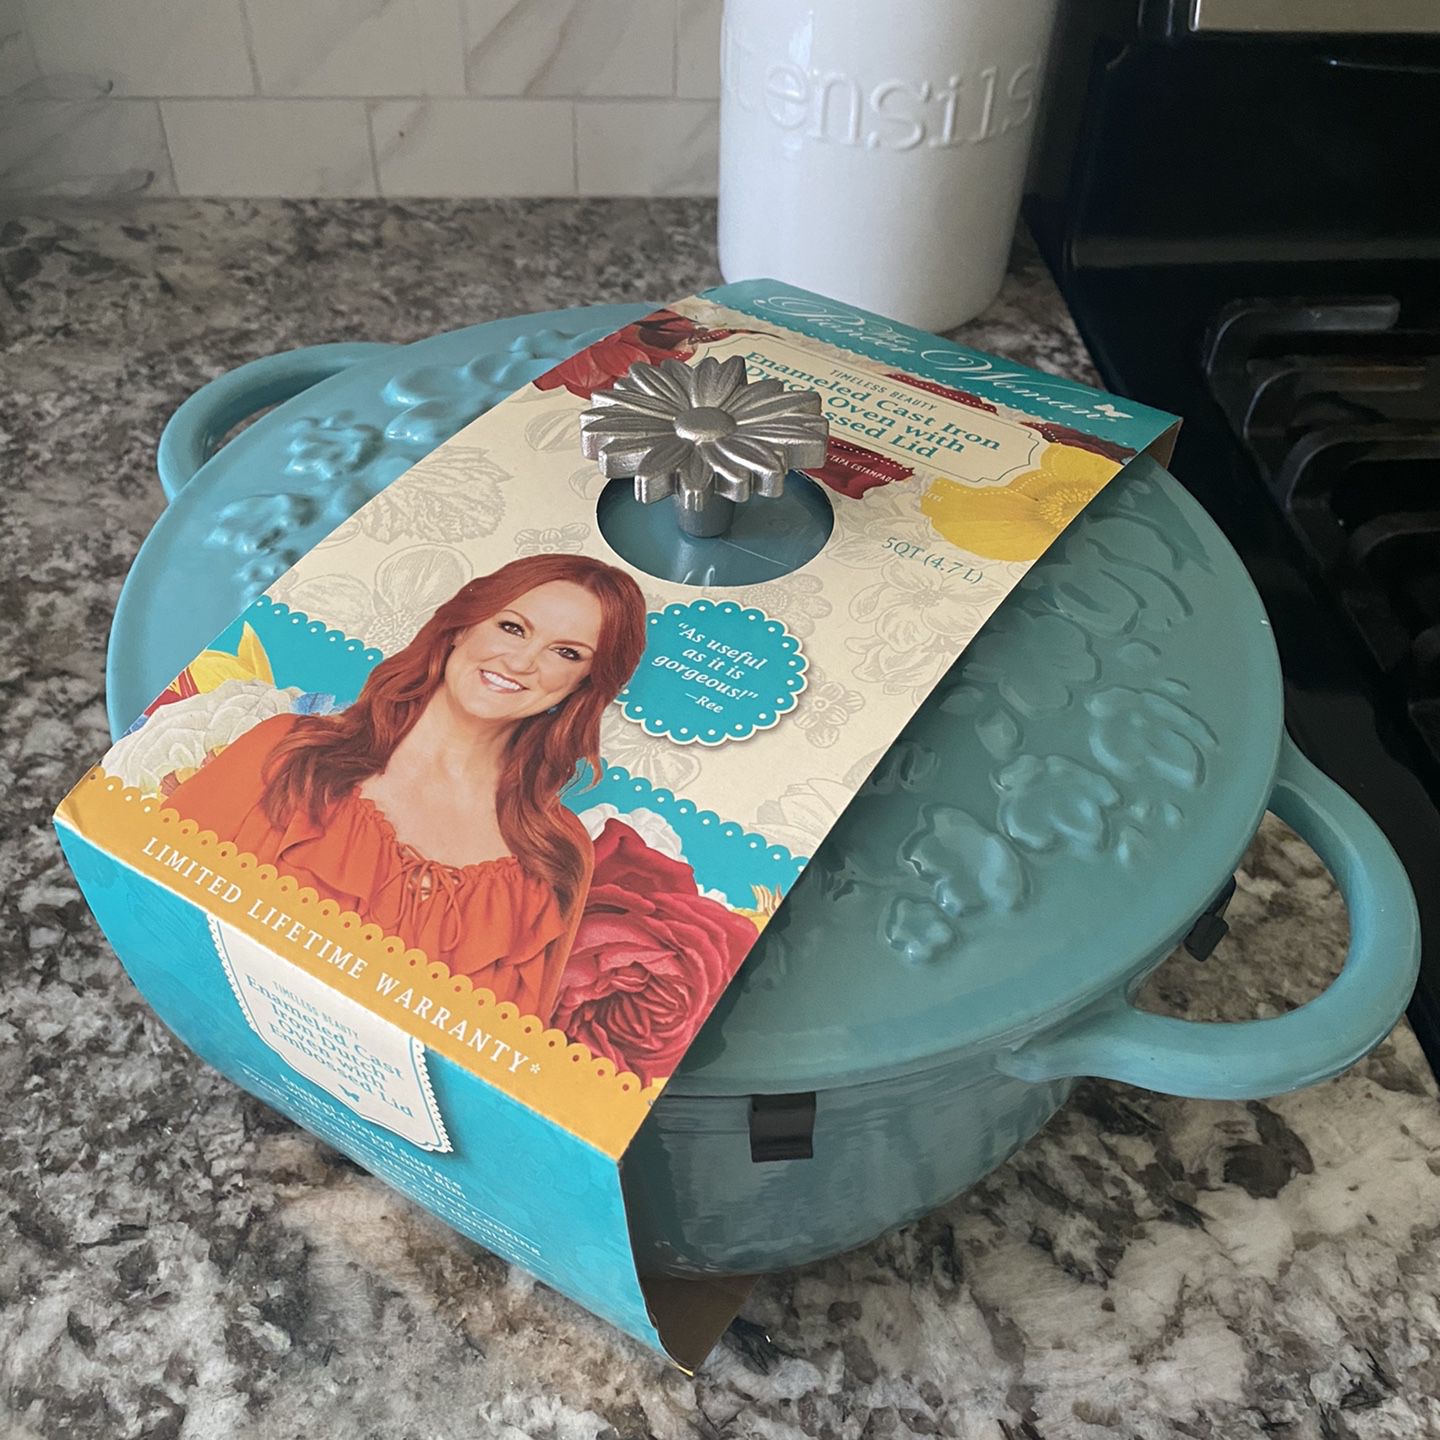 Pioneer Woman 5 Quart Dutch Oven for Sale in Houston, TX - OfferUp